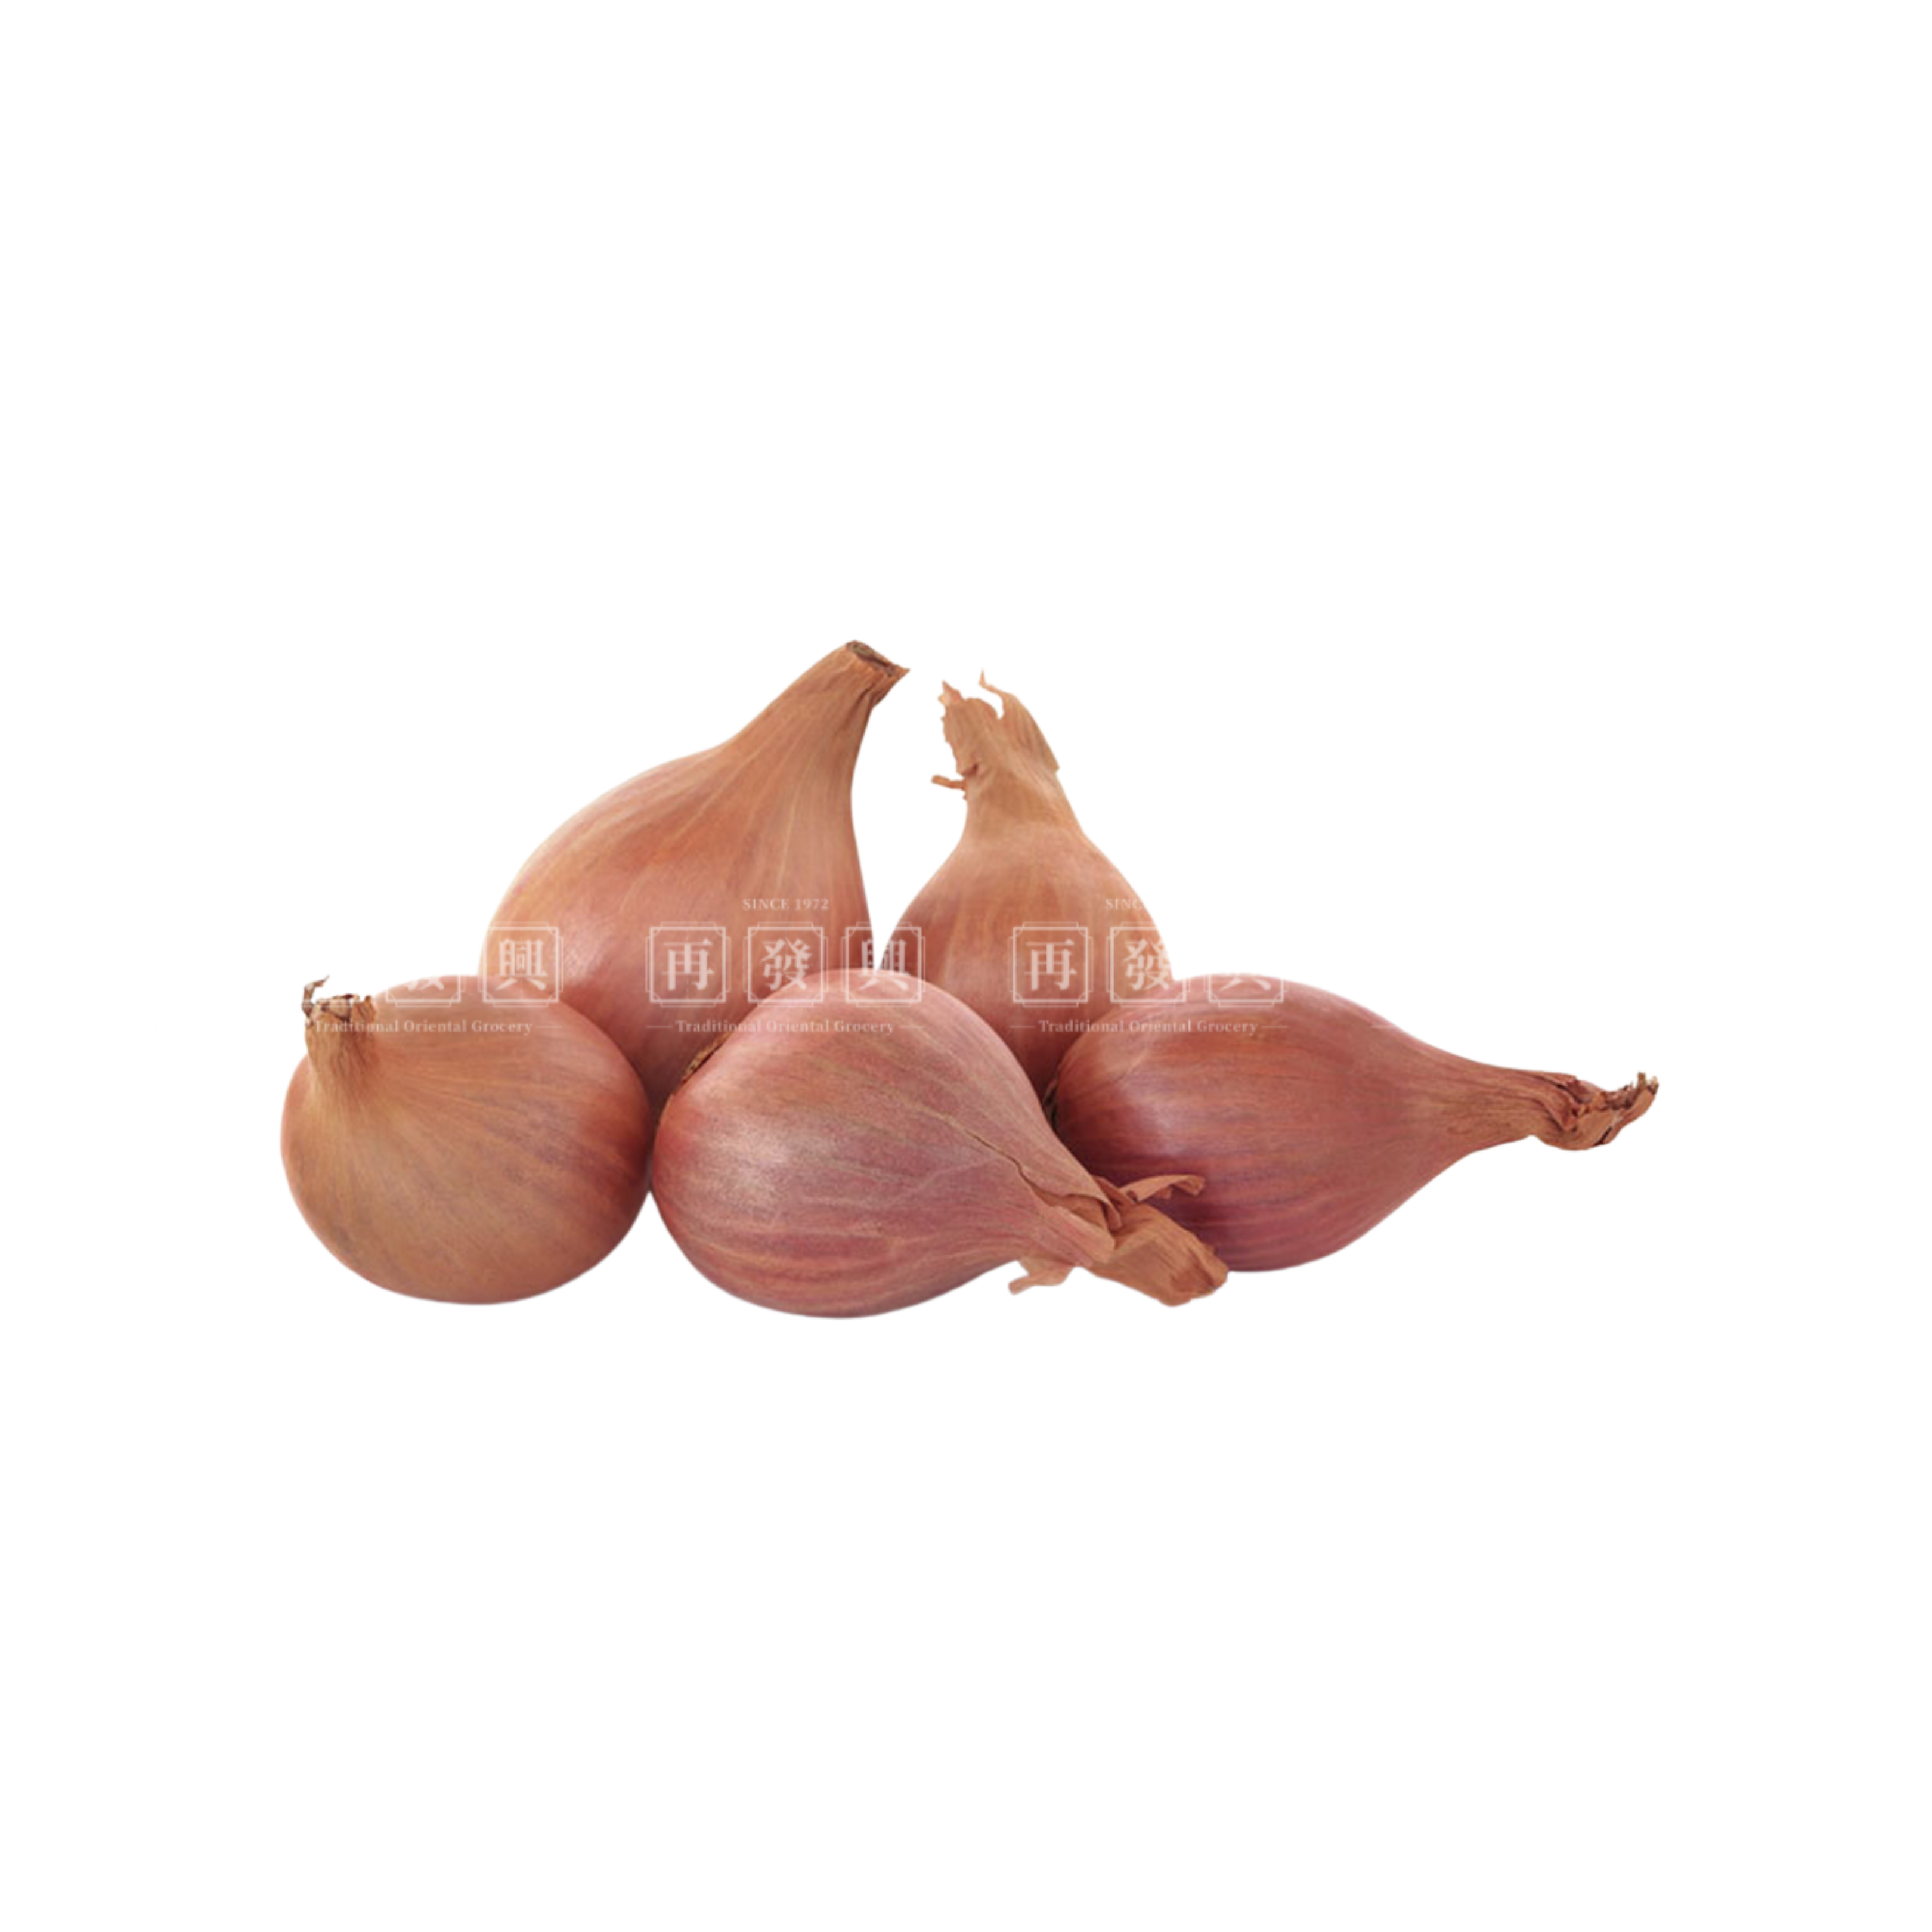 Shallots (Small Red Onions) 500g